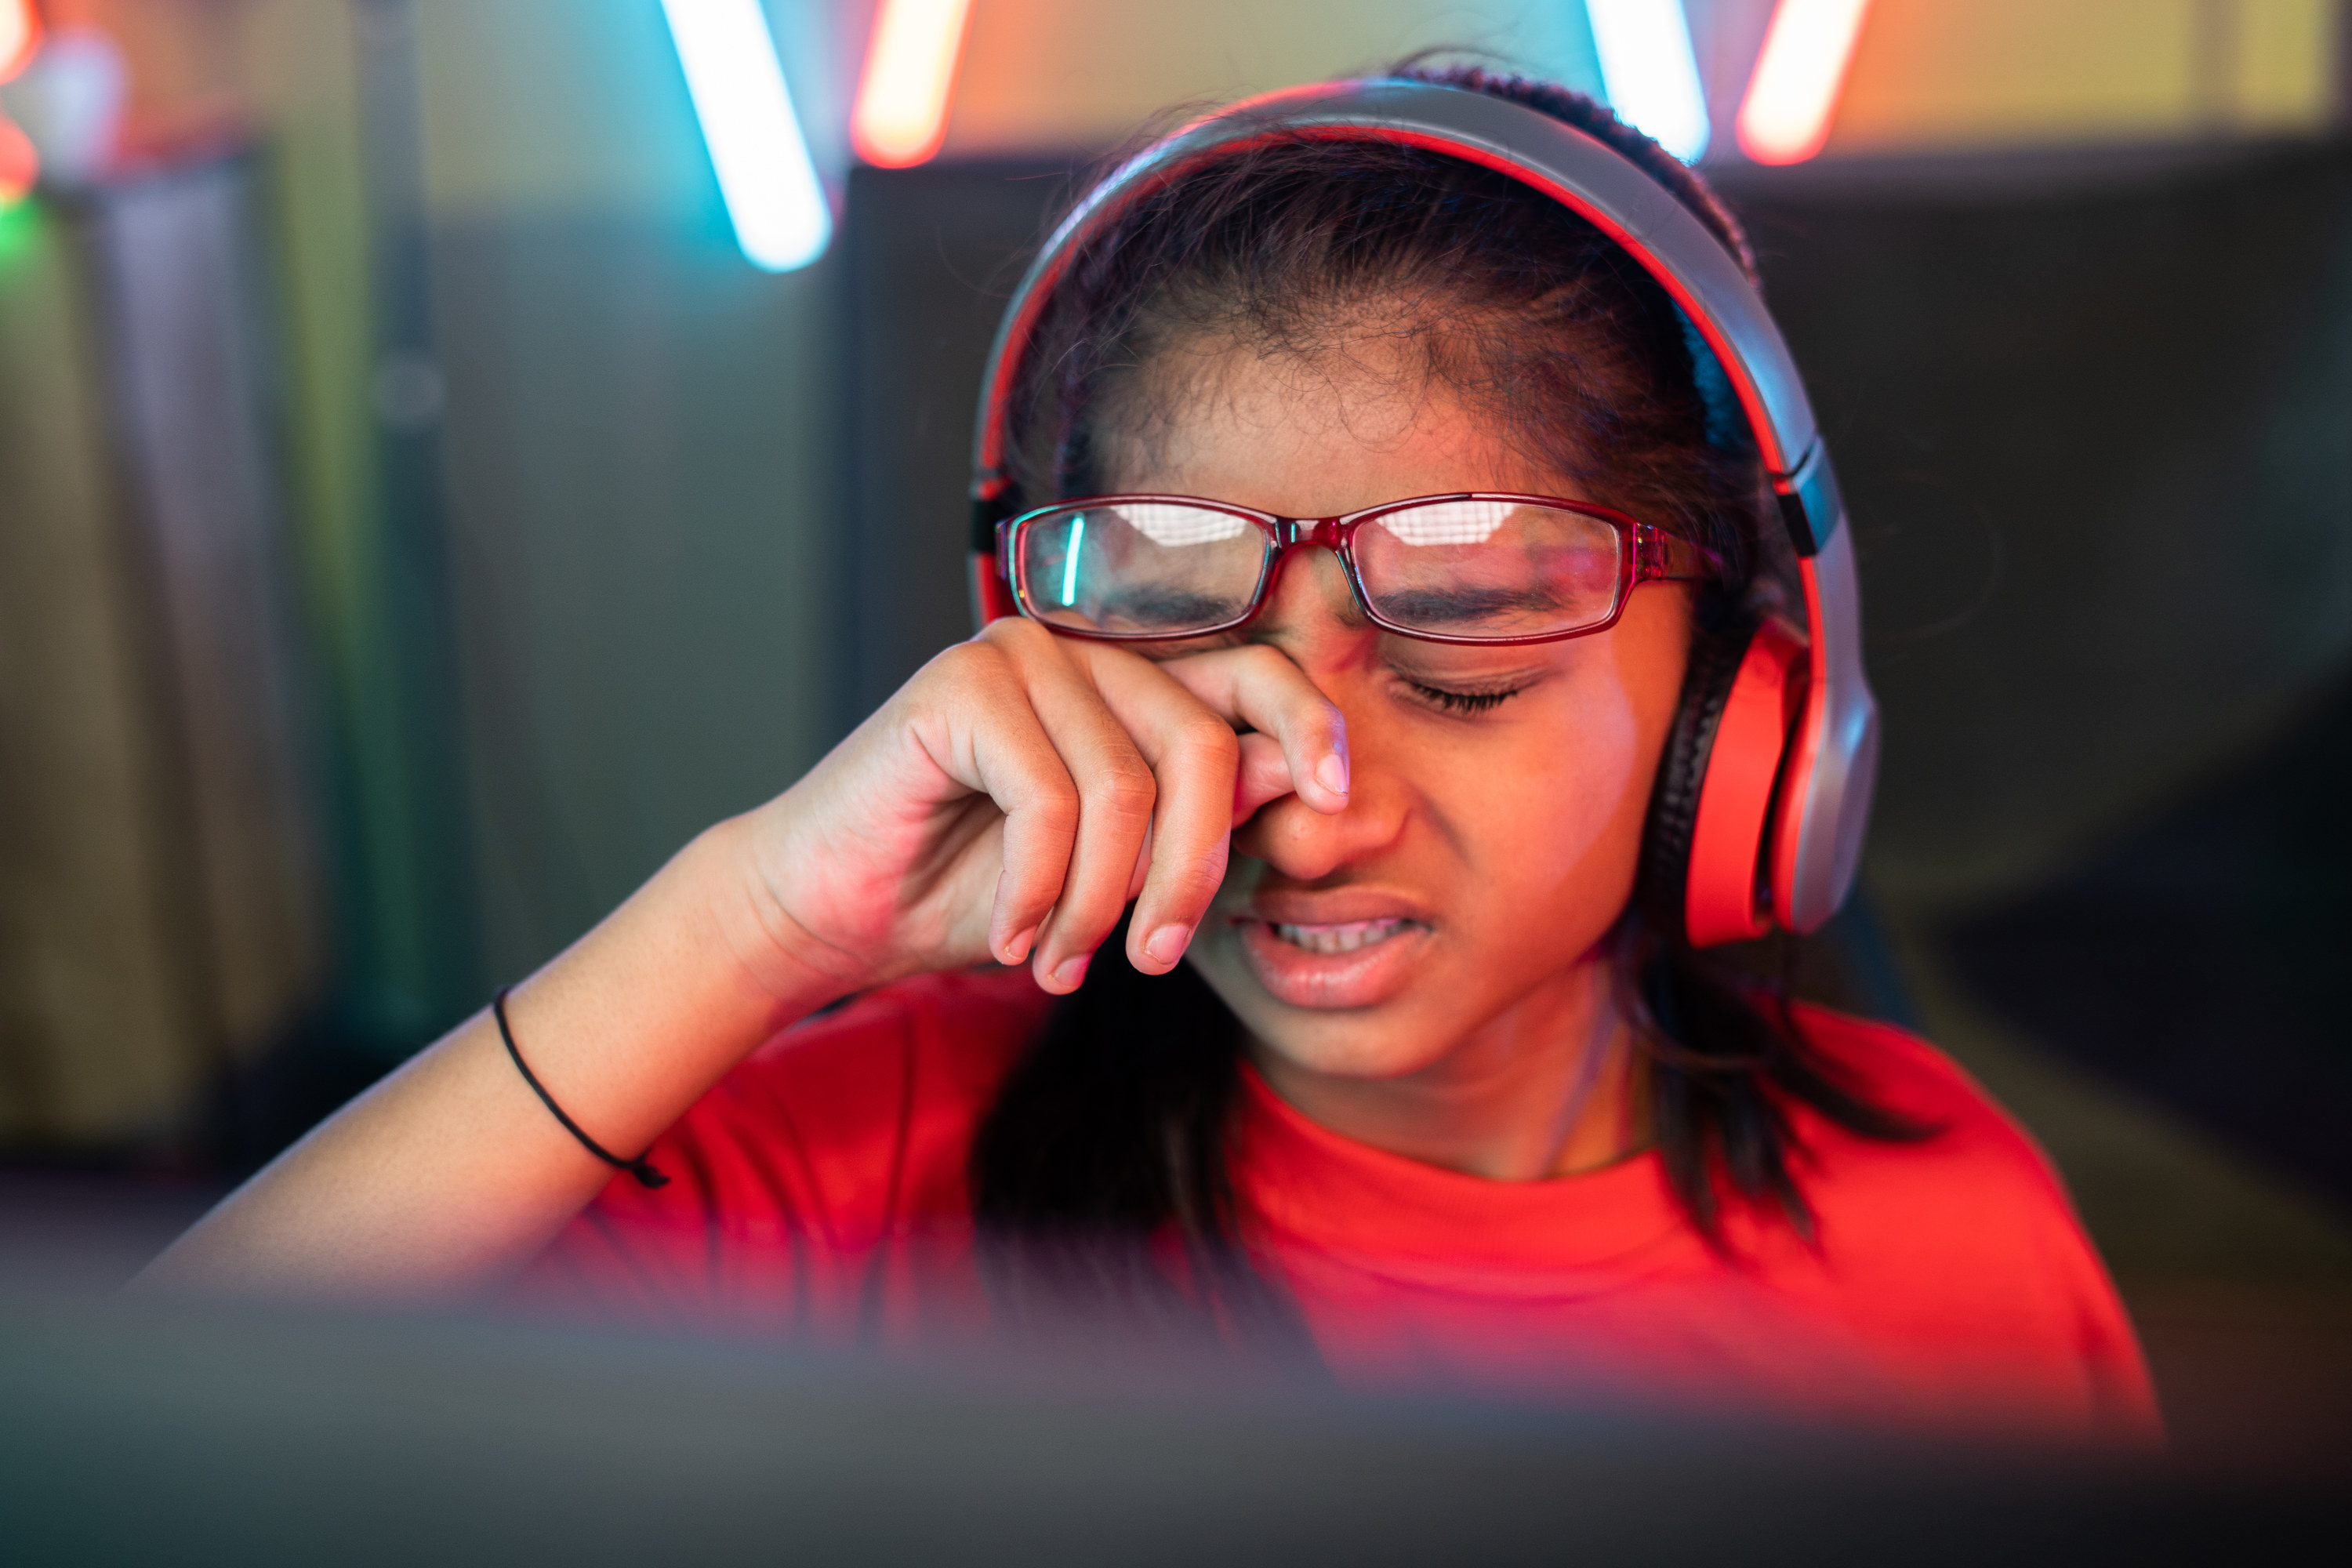 girl rubbing her eyes beneath her glasses w hile wearing headphones and looking tired and frustrated in front of her computer